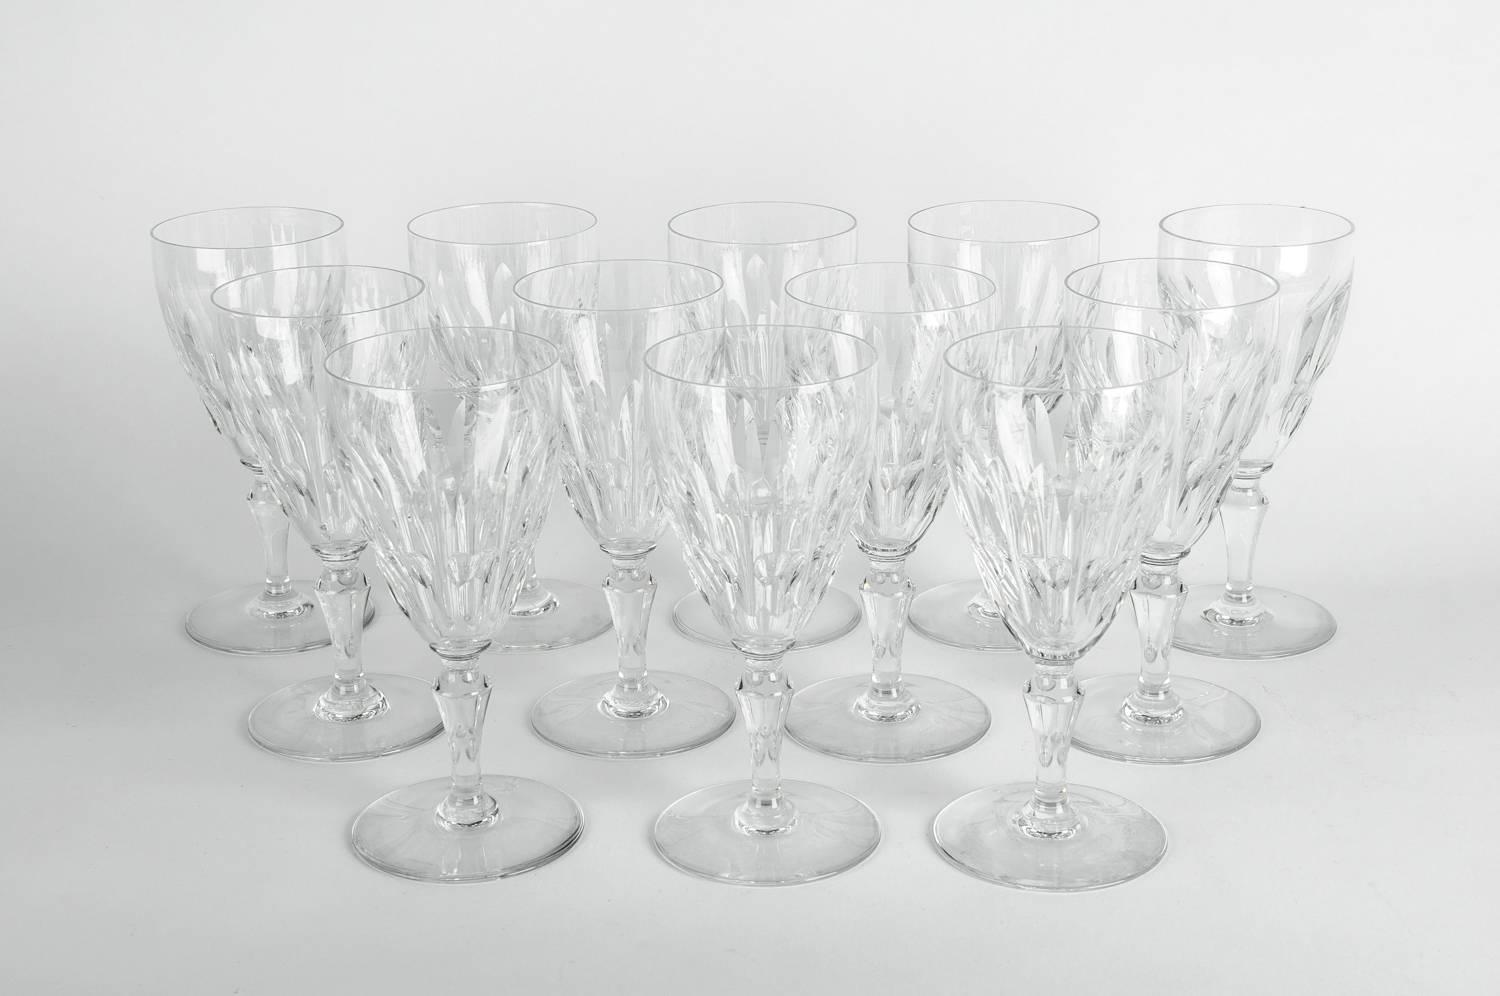 Mid-20th century Baccarat crystal wine / water glassware set of 12 pieces. Each glass is in excellent condition. Each glass measure 7.5 inches high x 3.5 inches bottom diameter.